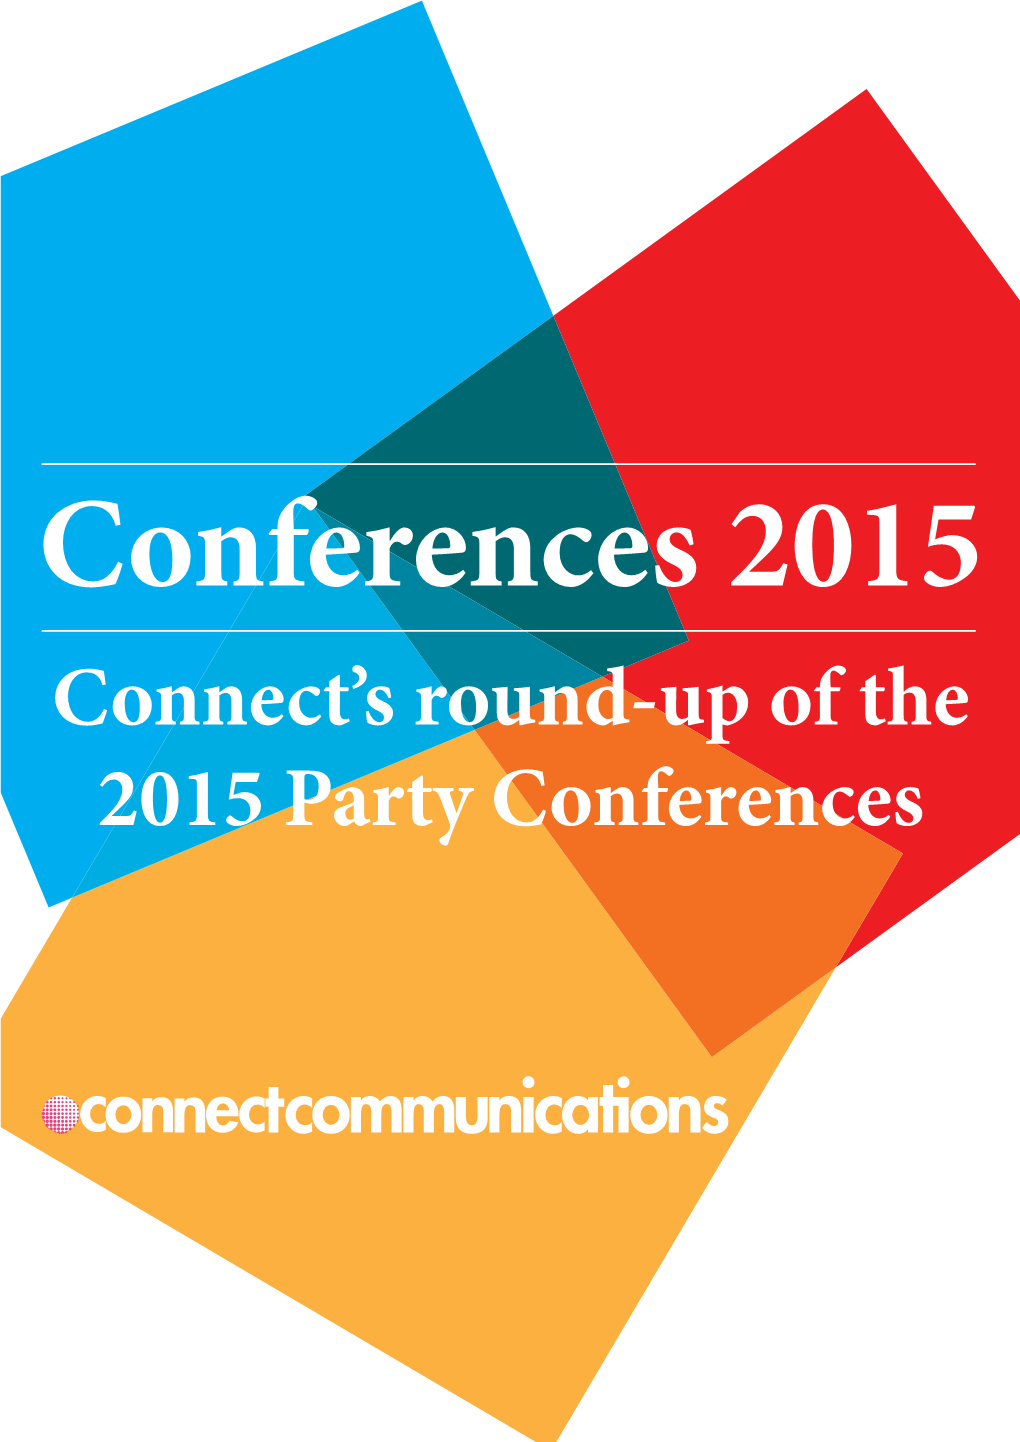 Conference Round-Up